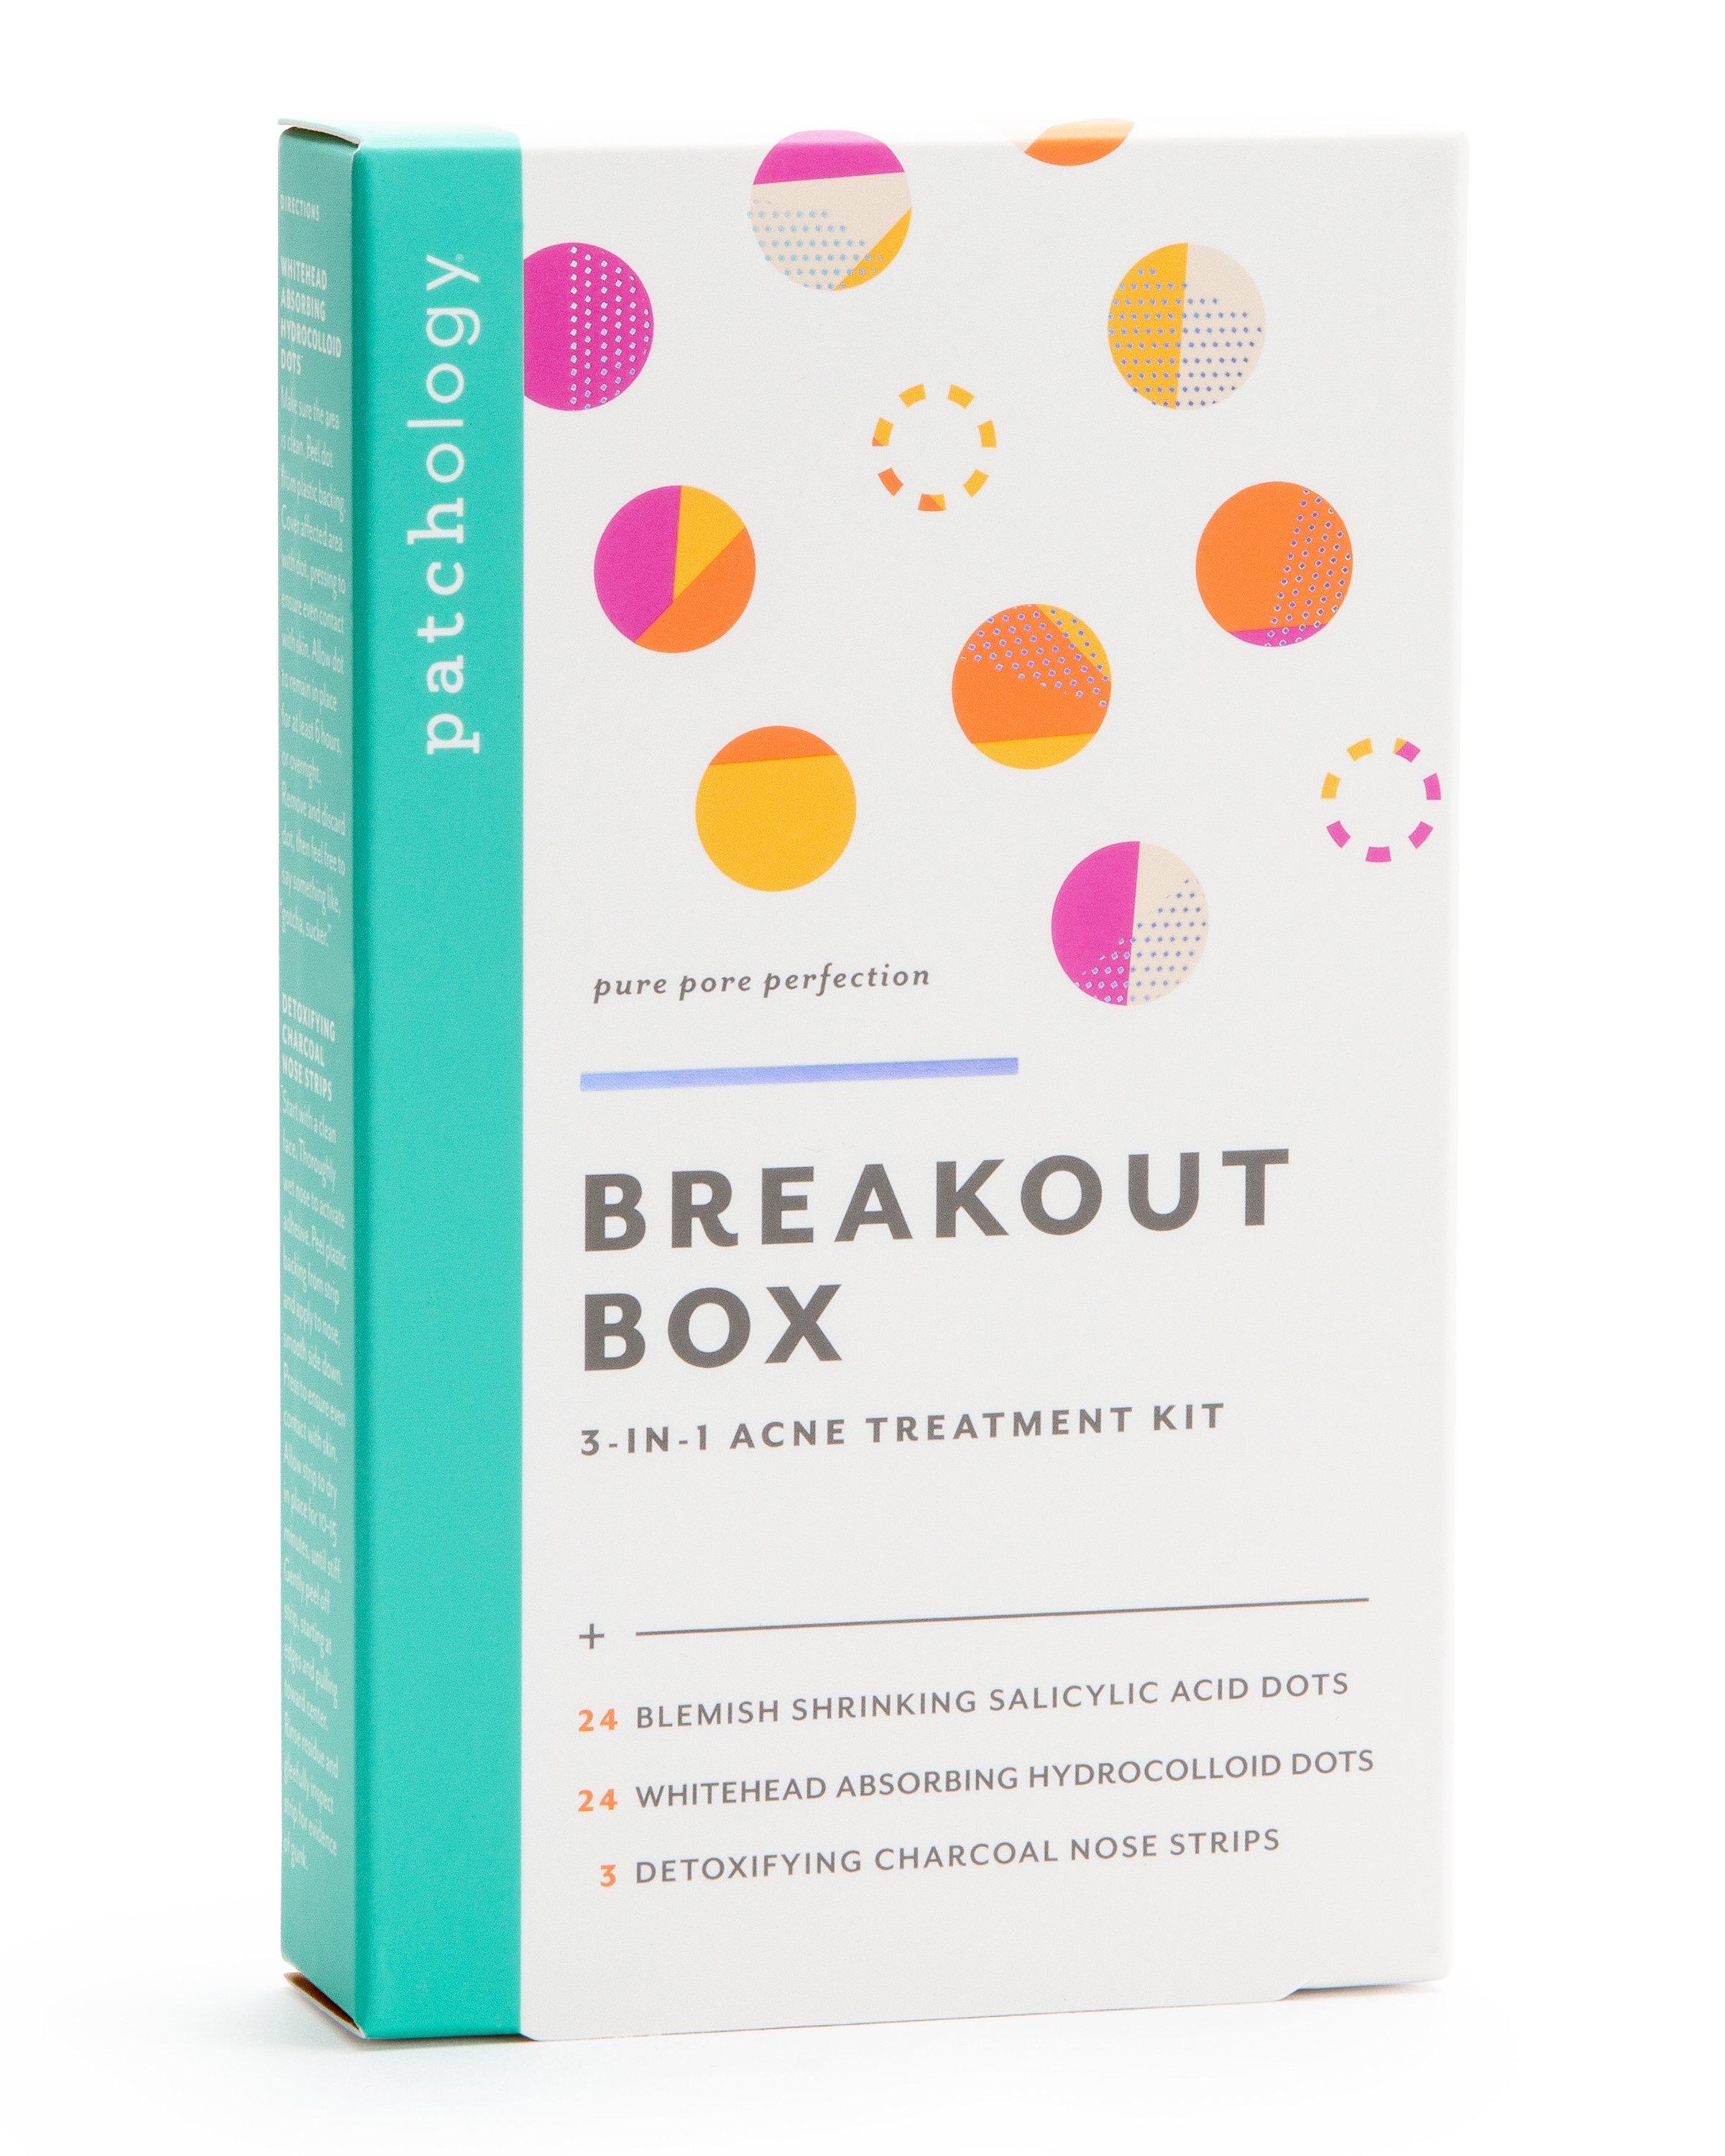 Patchology Breakout Box 3-In-1 Acne Treatment (1).jpeg